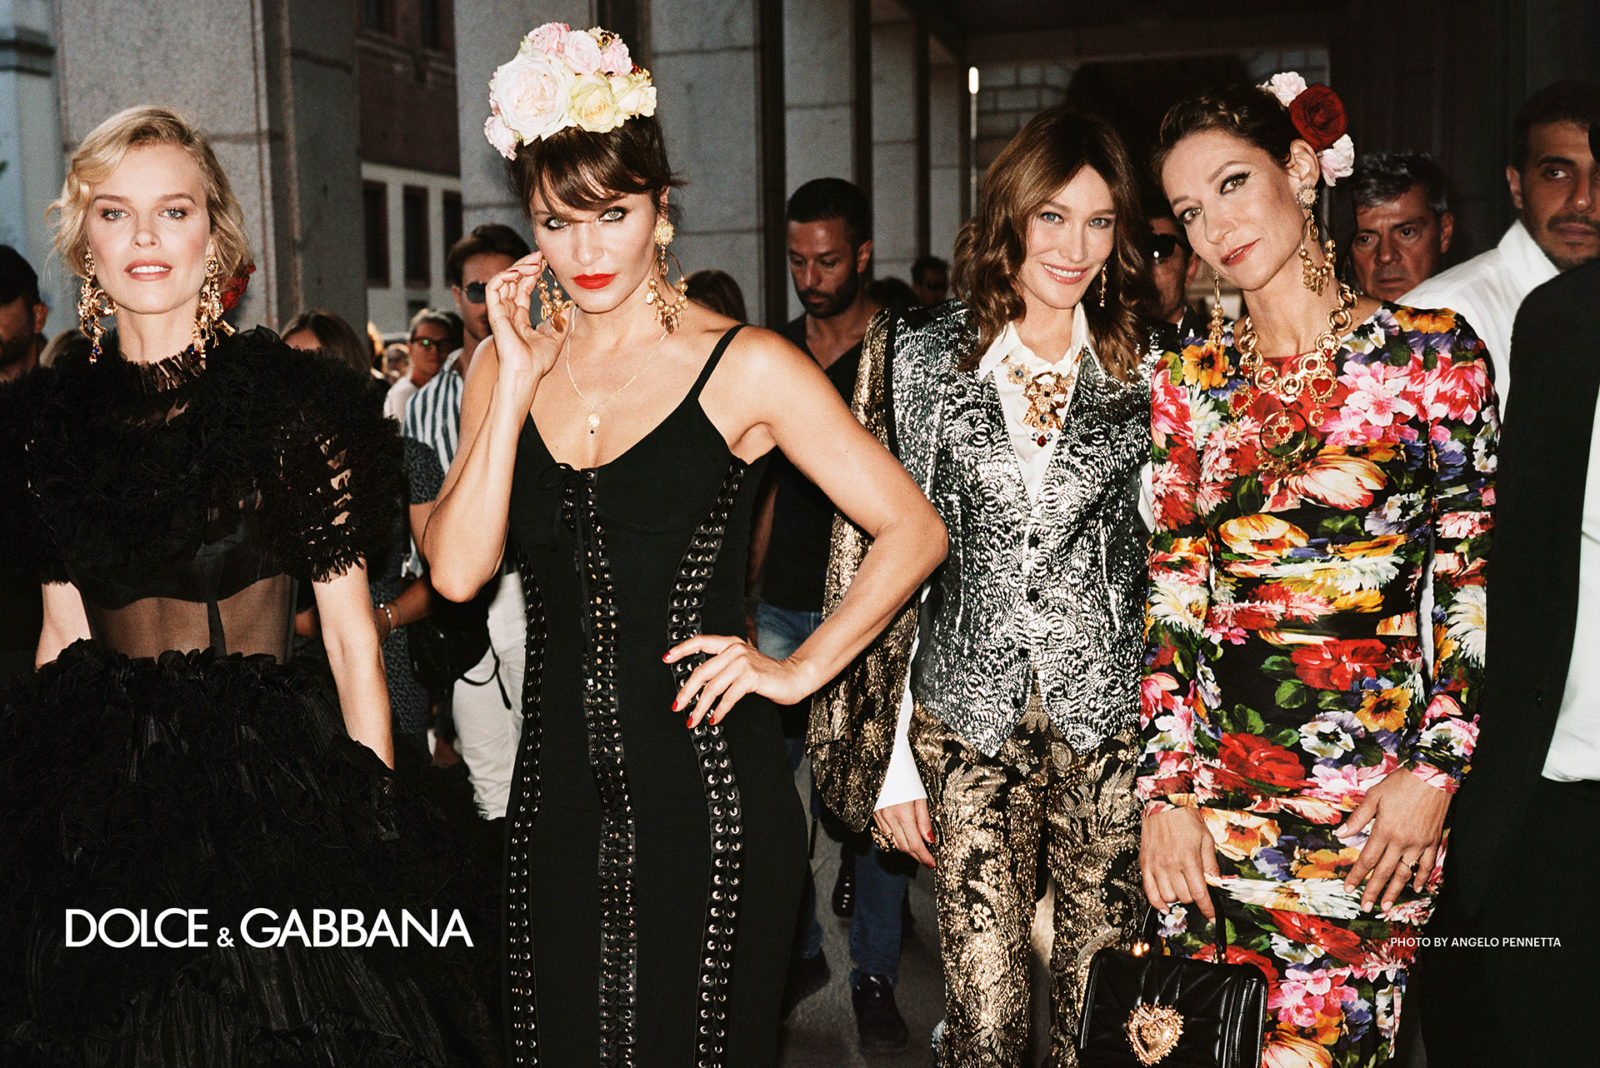 dolce gabbana commercial 2019